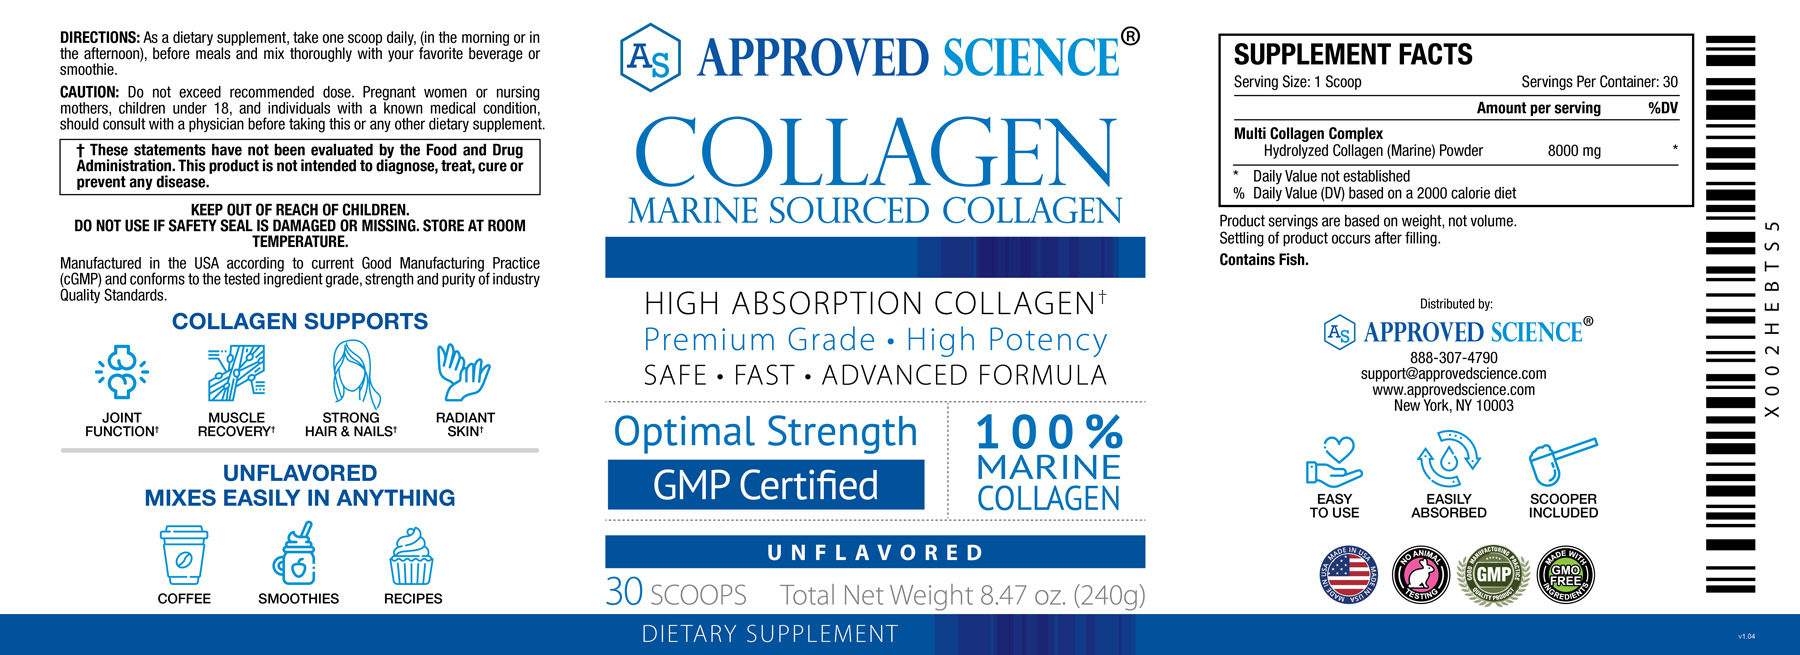 Approved Science® Collagen Supplement Facts